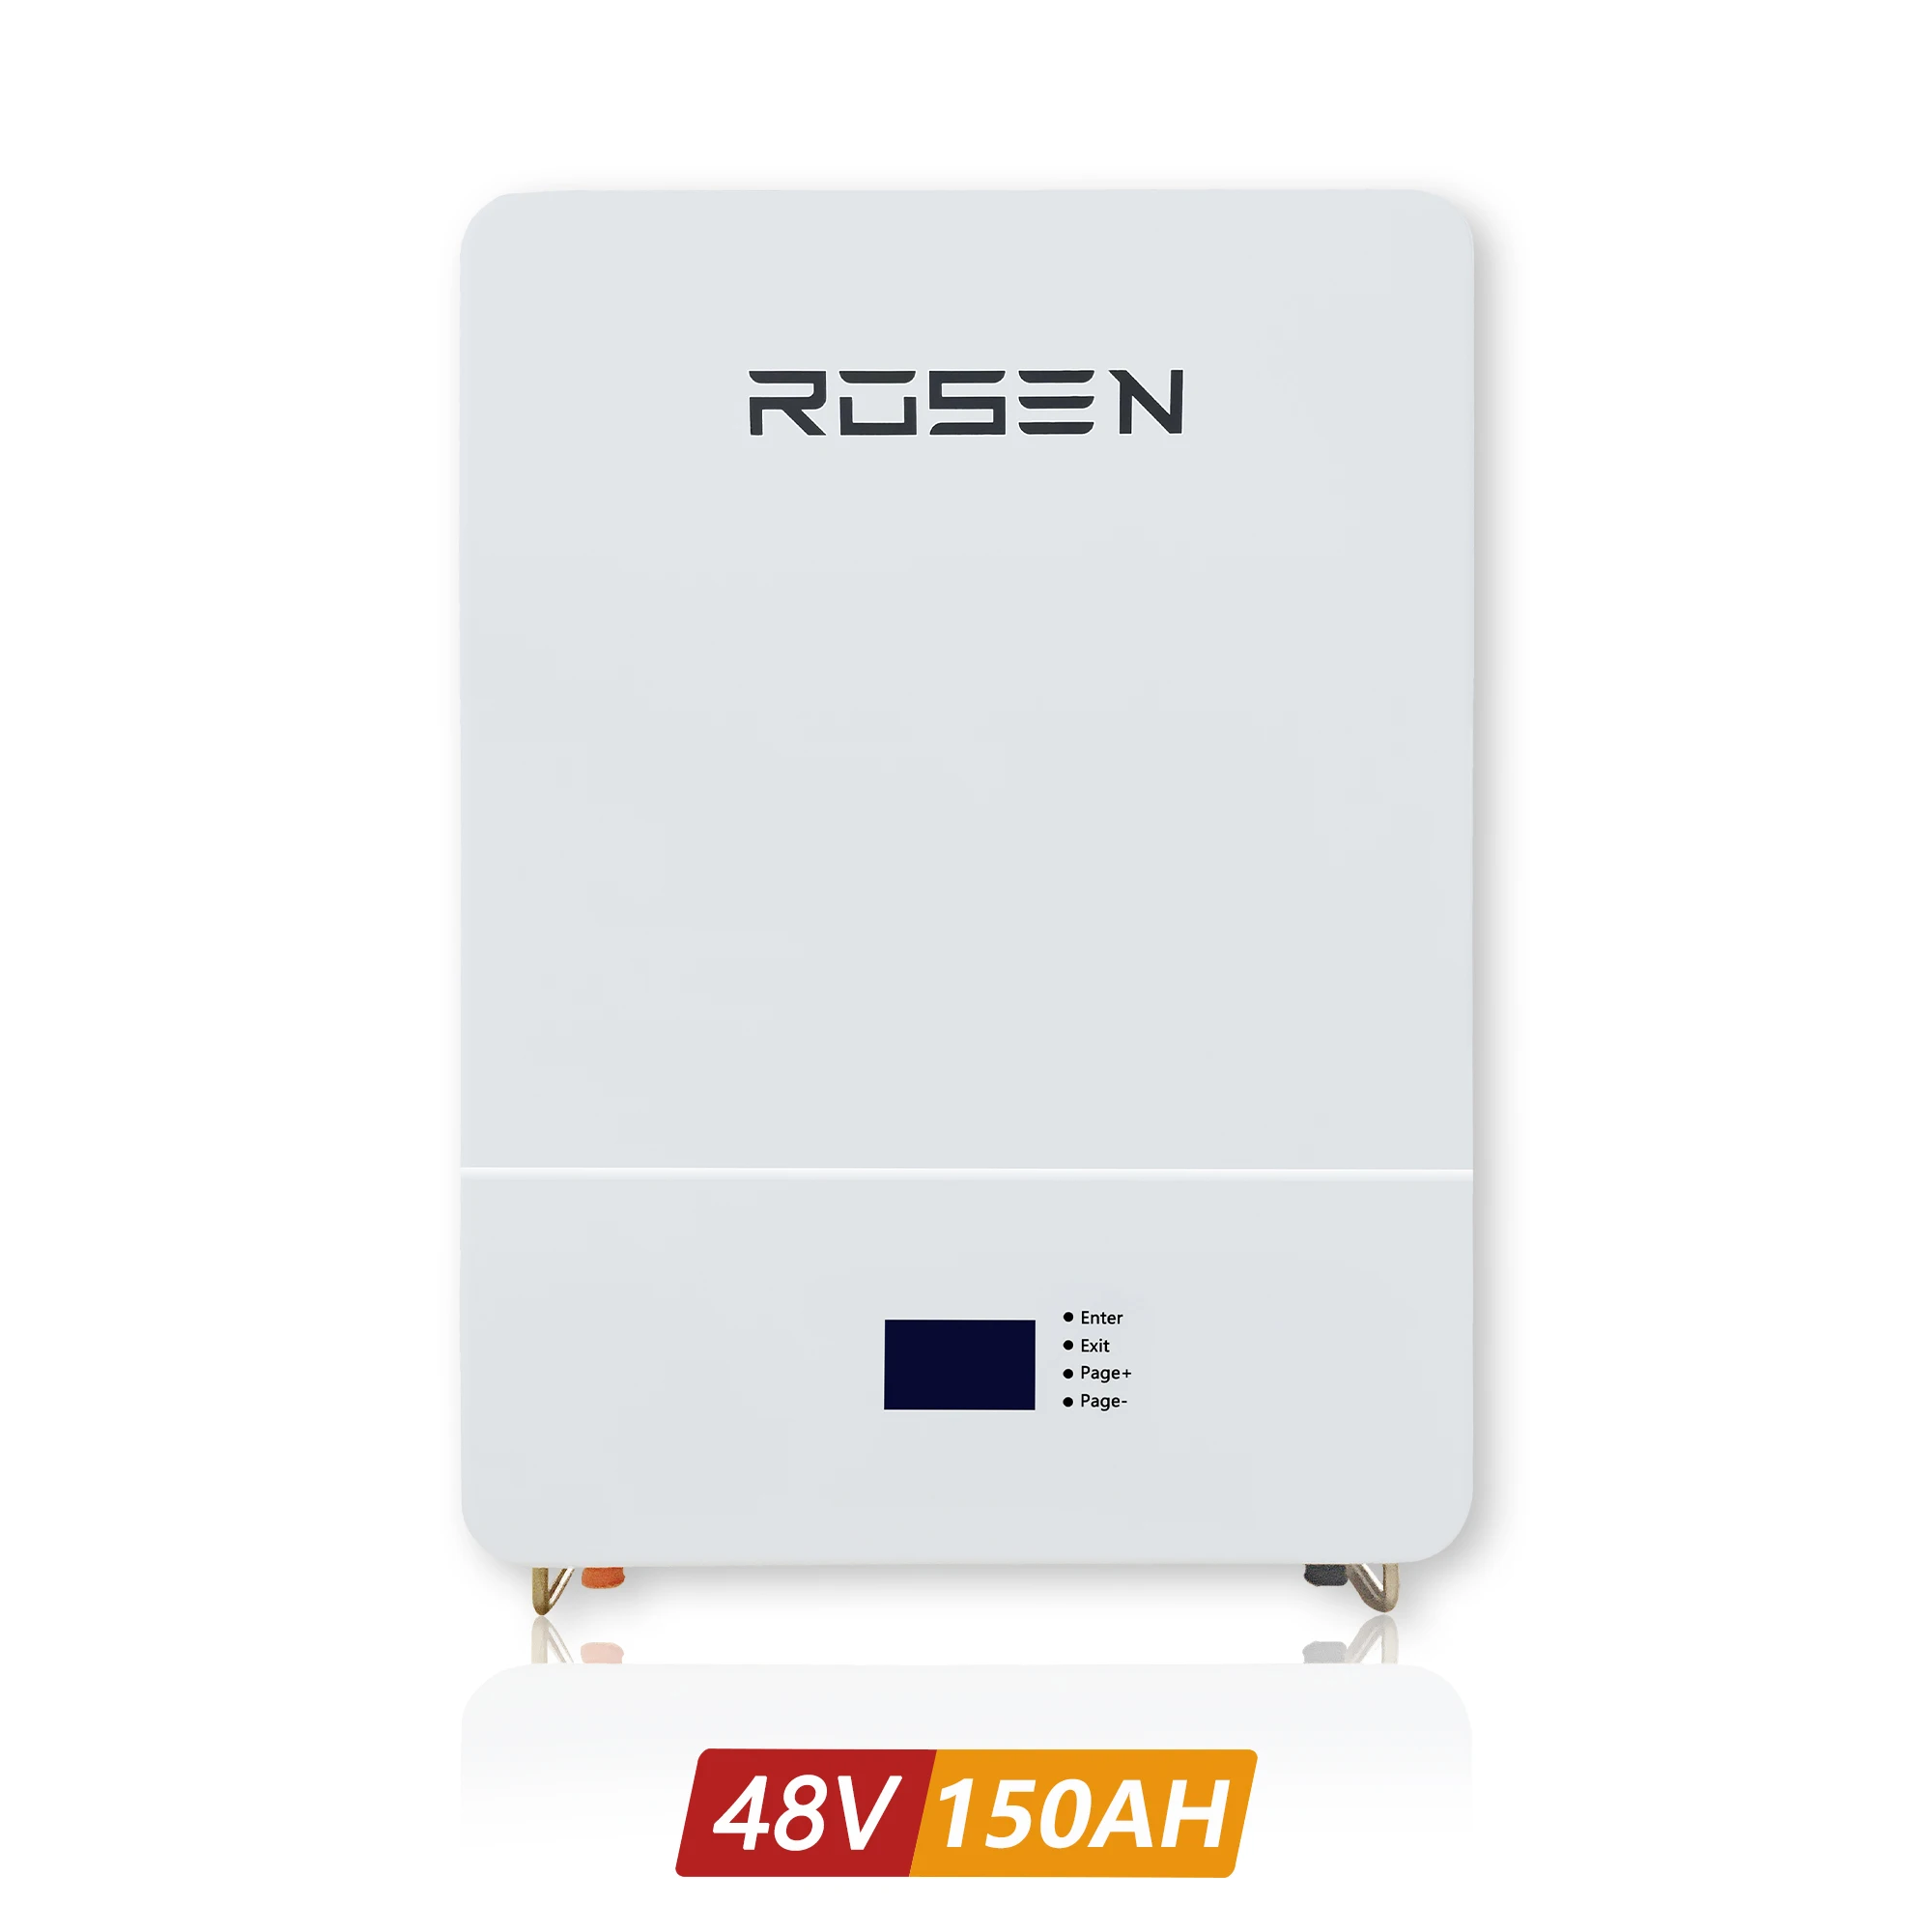 Rosen Lifepo4 48V 150Ah Battery Lithium Ion Battery 5Kwh 7.5kwh 10kwh 48V Solar System With Lithium Battery